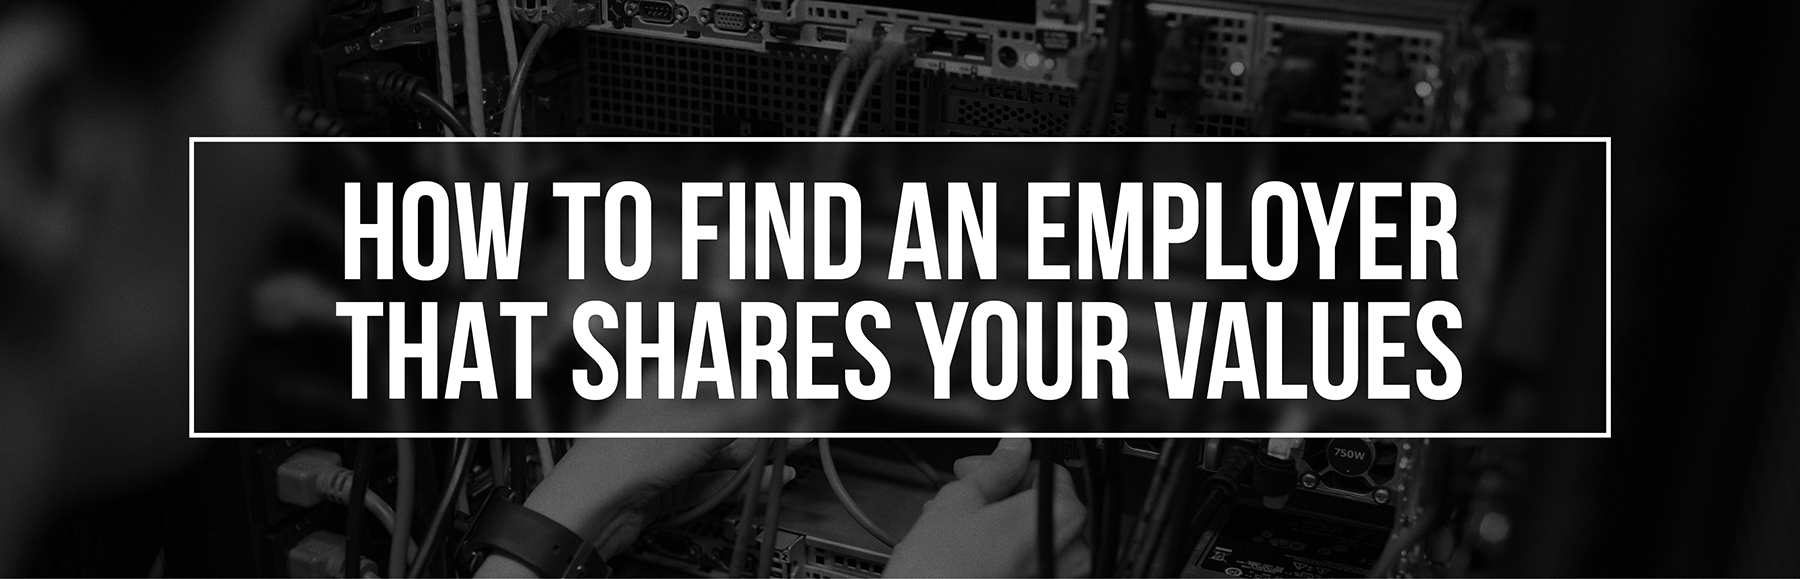 how-to-find-employer-shares-values